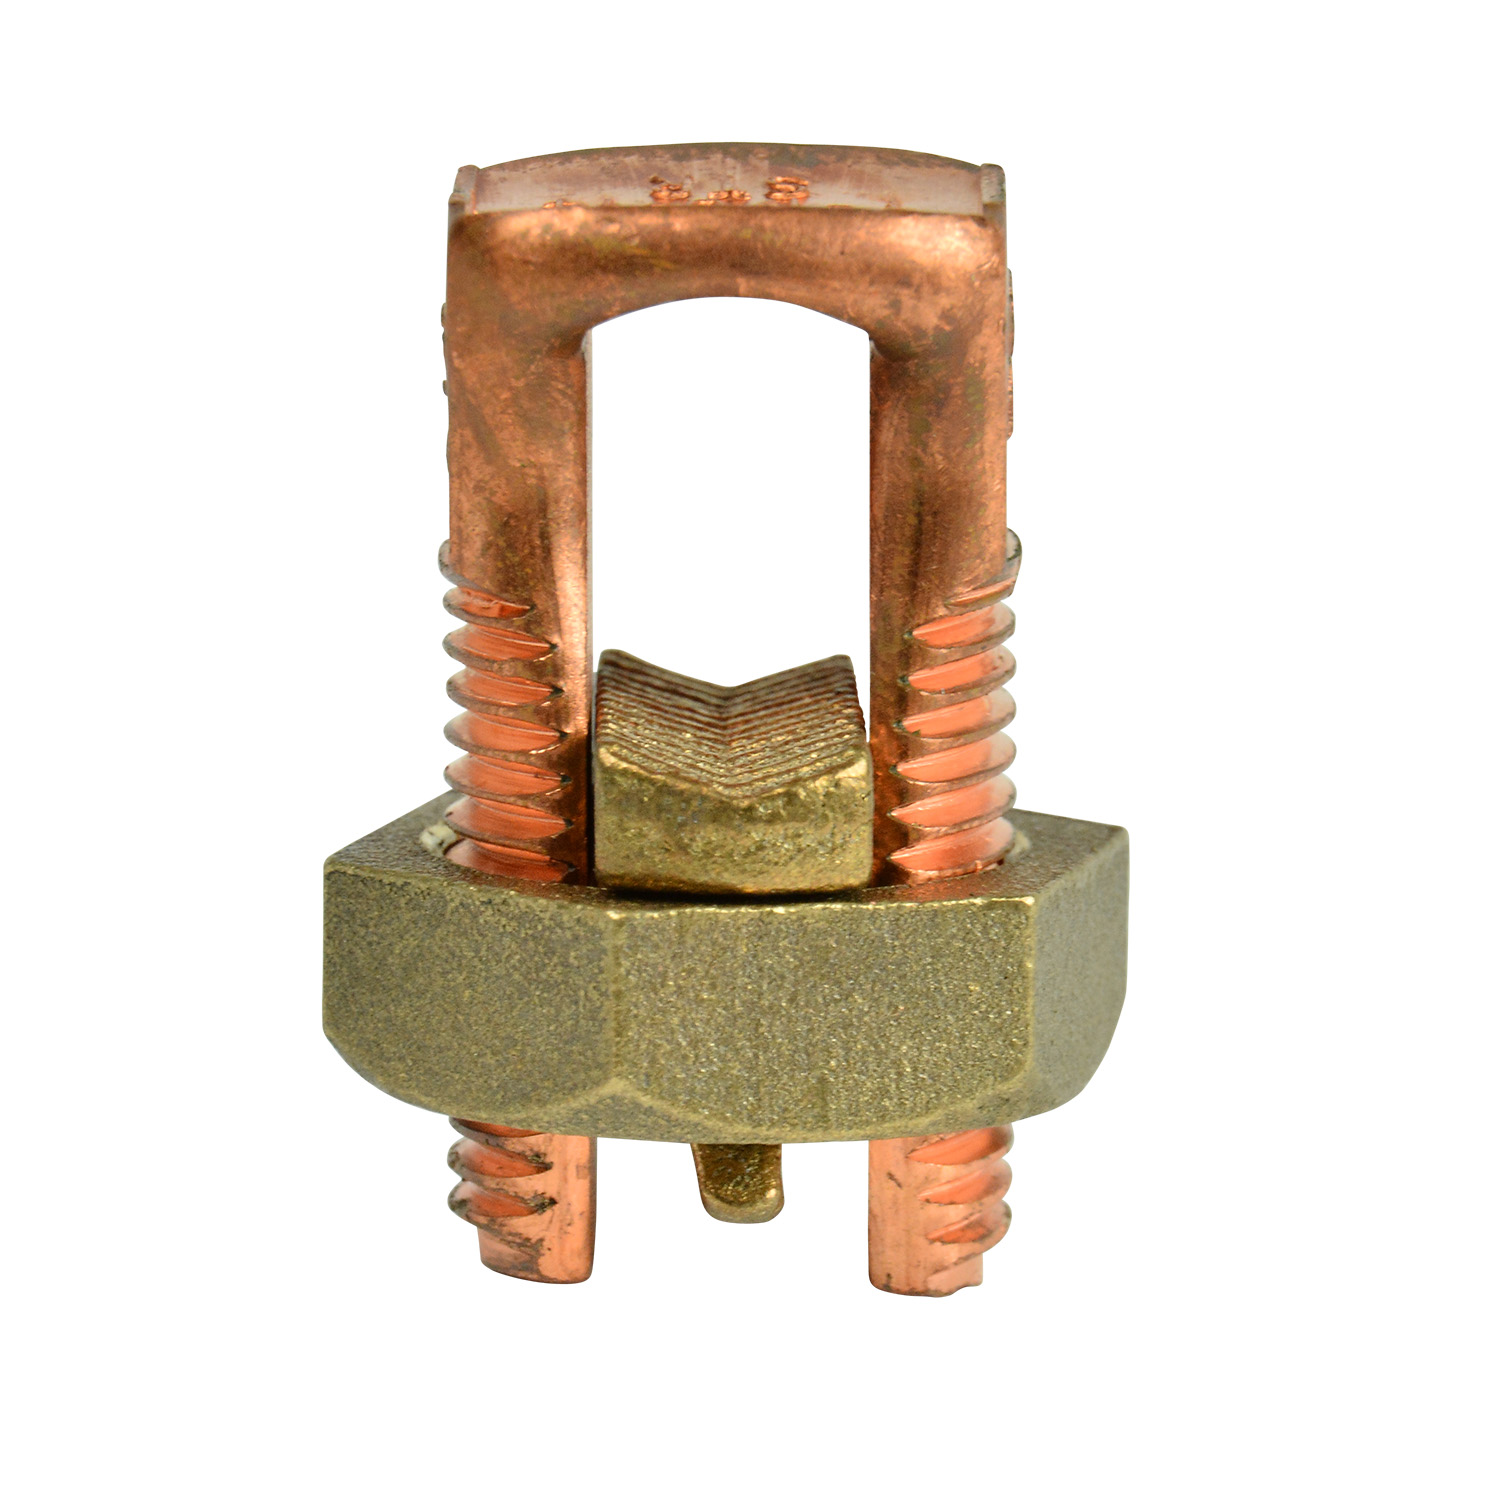 Split Bolt Connector for Copper and Copperweld Wires 0.057-0.116 Wire Diameter Range 80lbs Torque